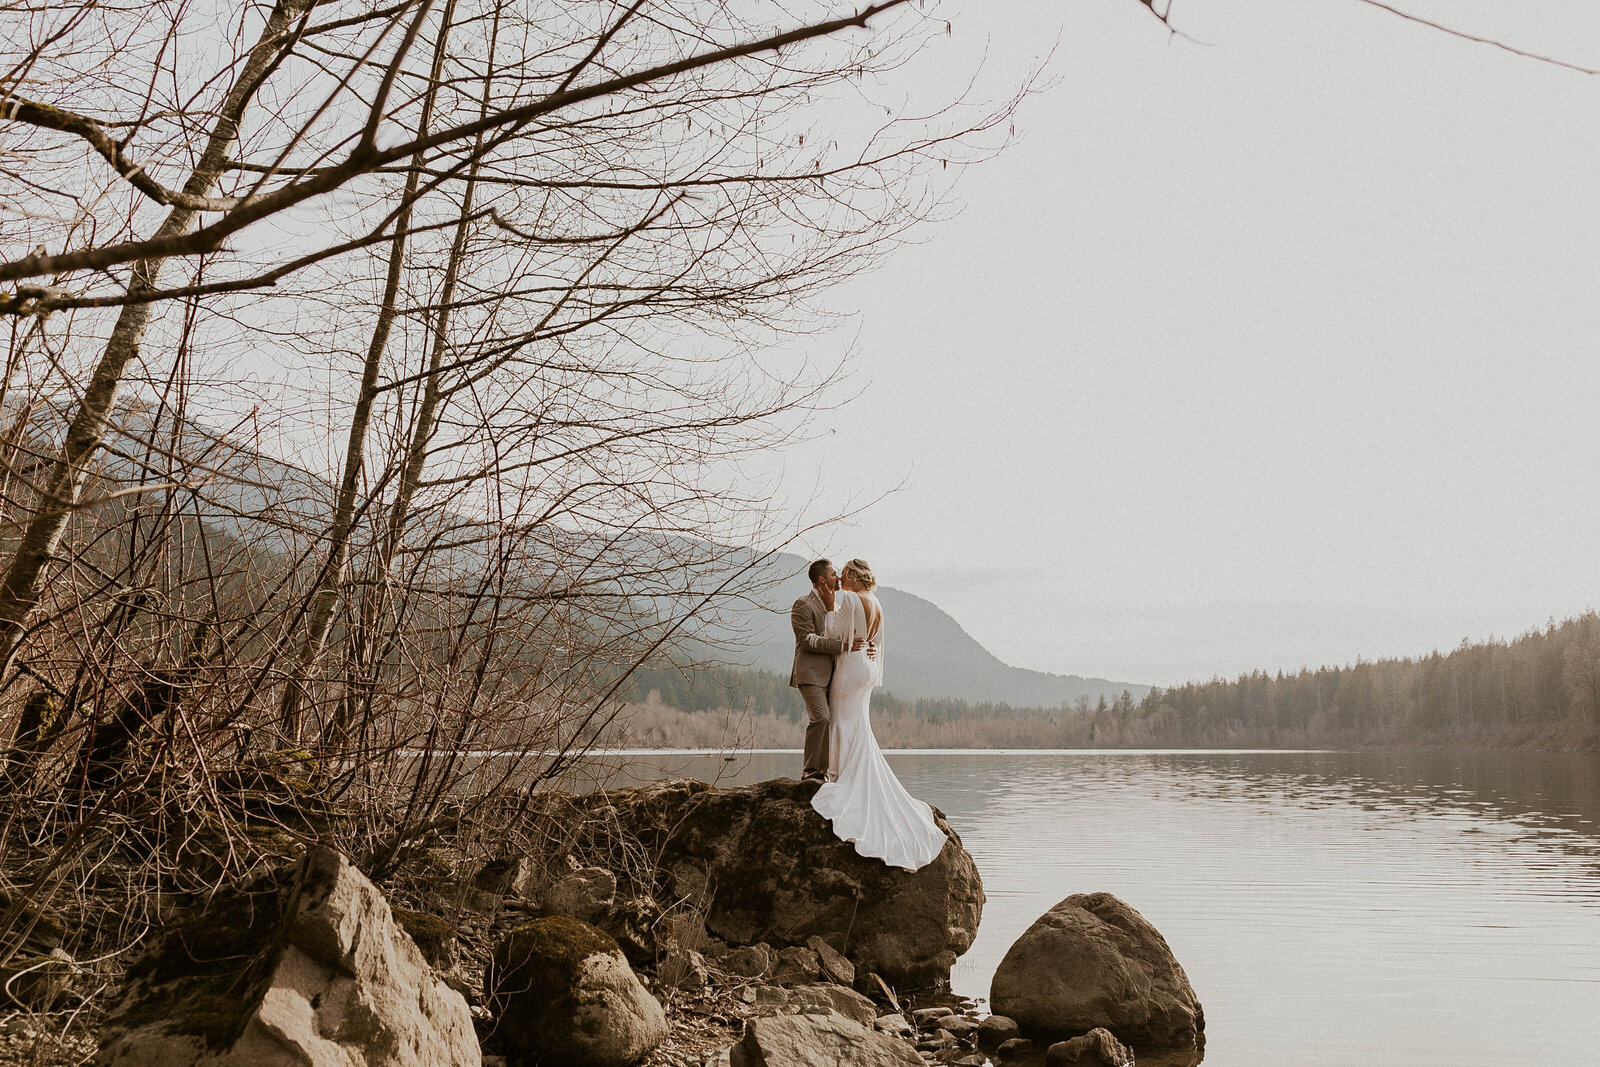 lakeside elopement romance with bride and groom